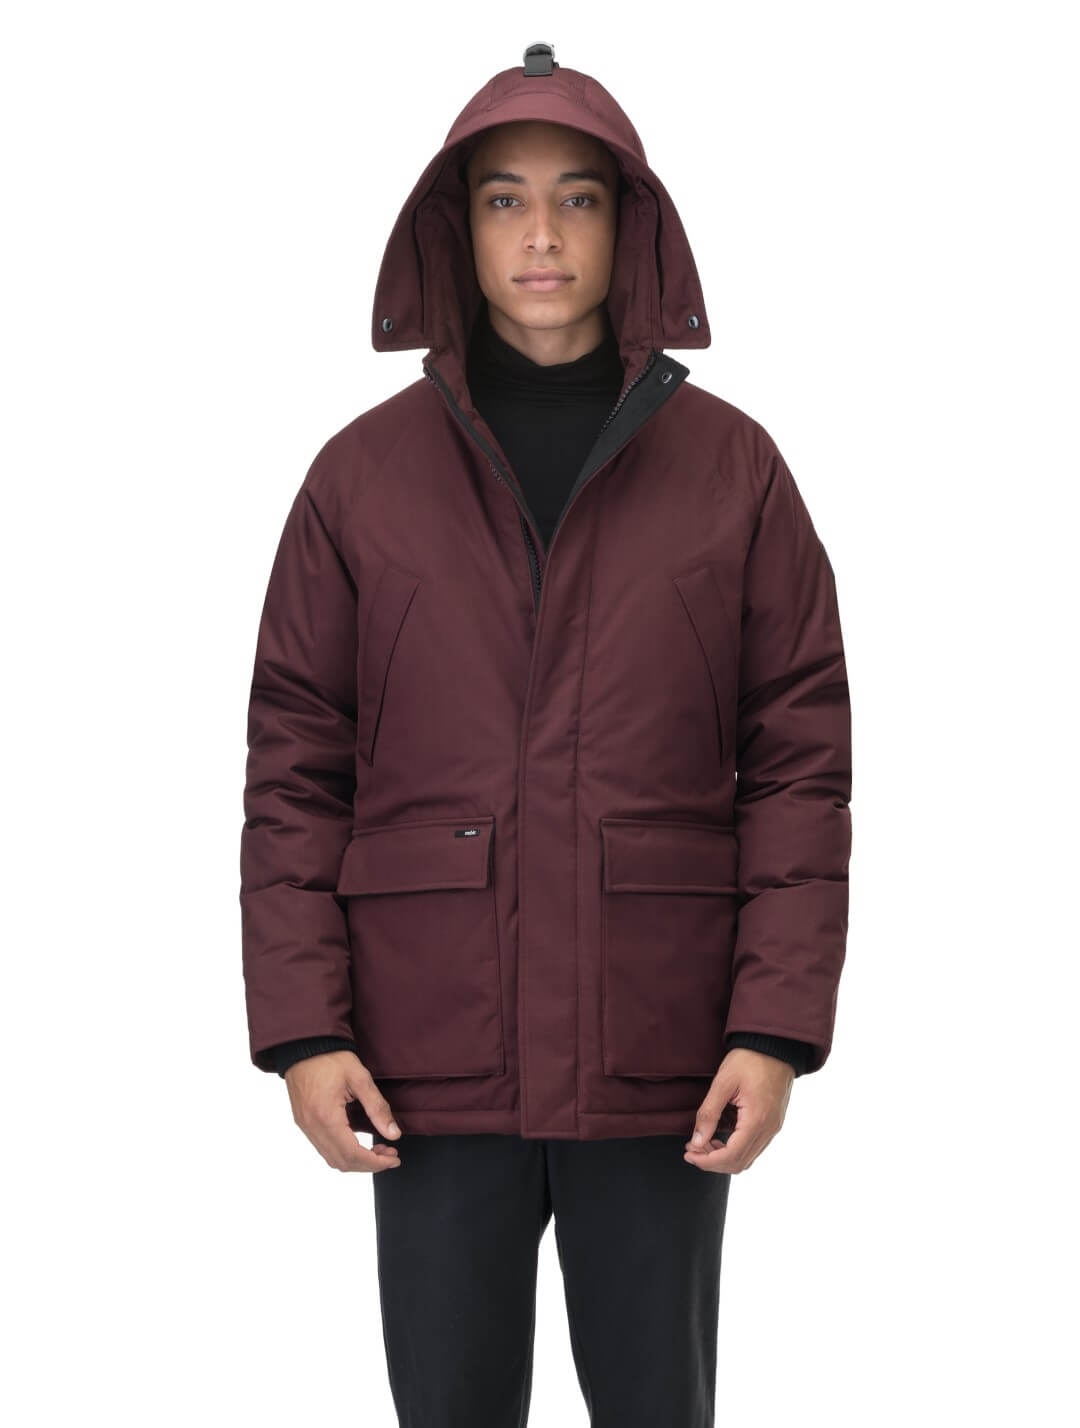 Men's waist length down filled jacket with two front pockets with magnetic closure and a removable fur trim on the hood in Merlot